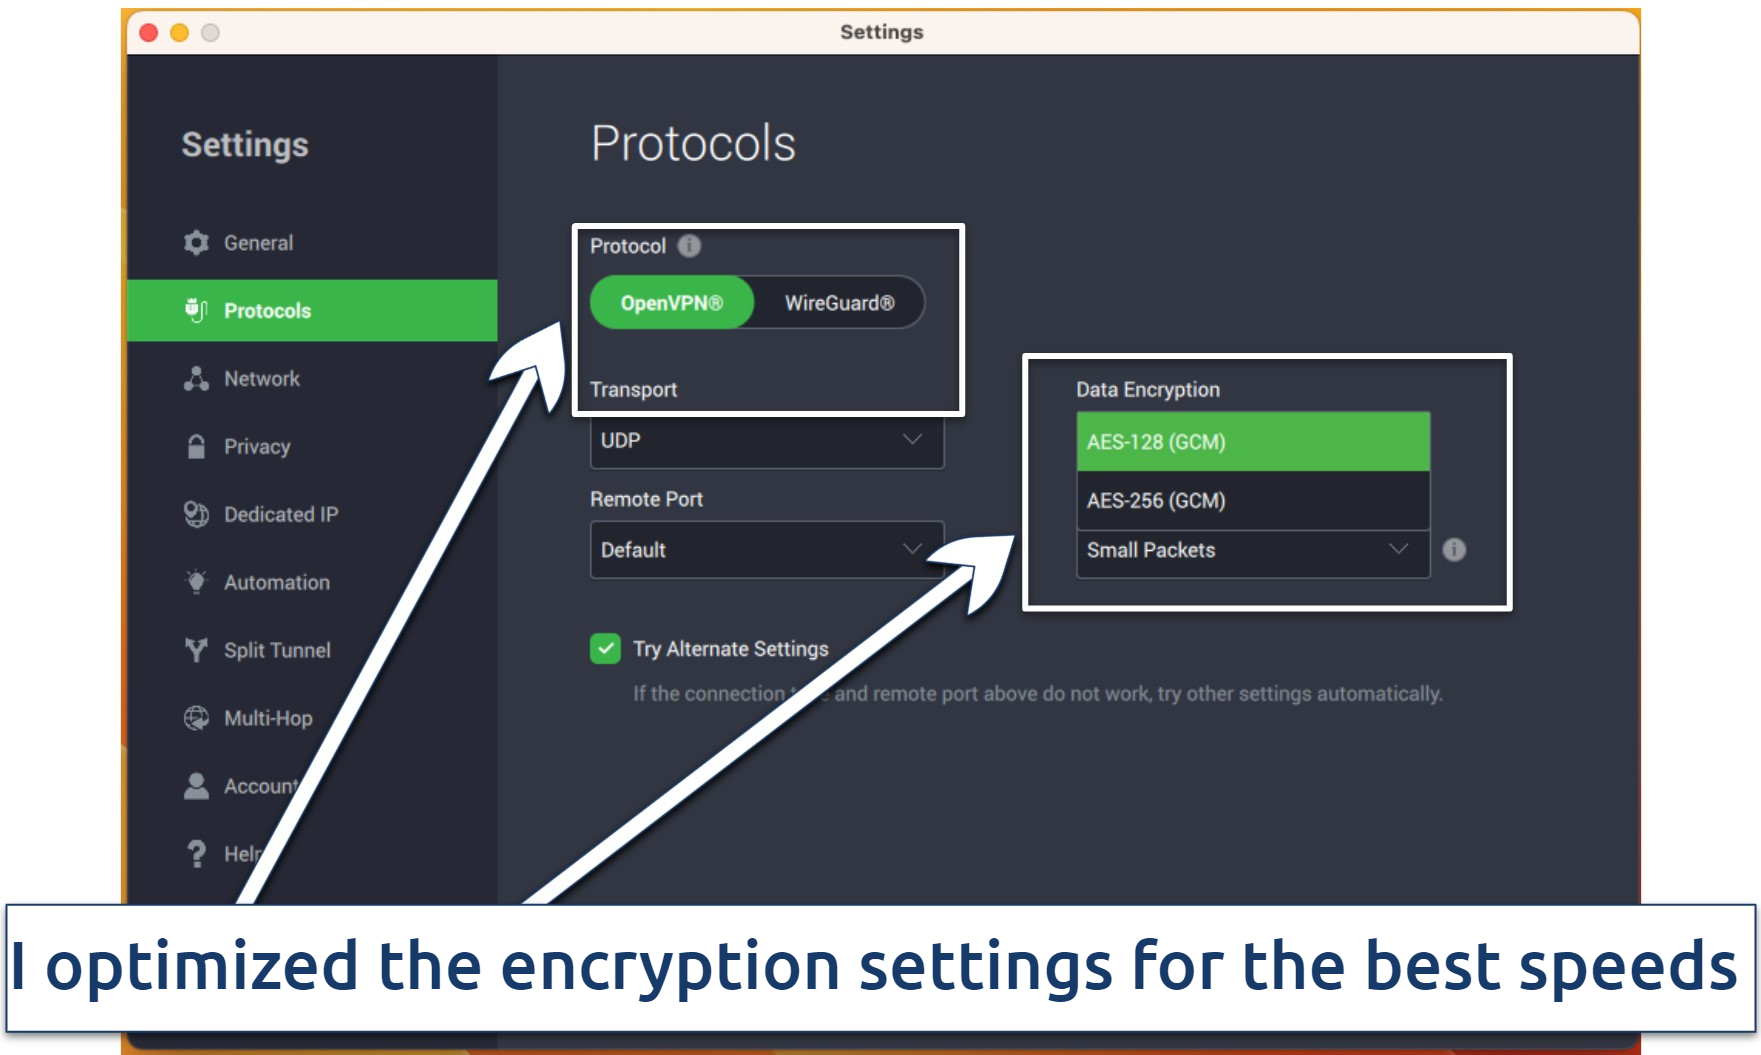 Screenshot of the encryption settings in the PIA app